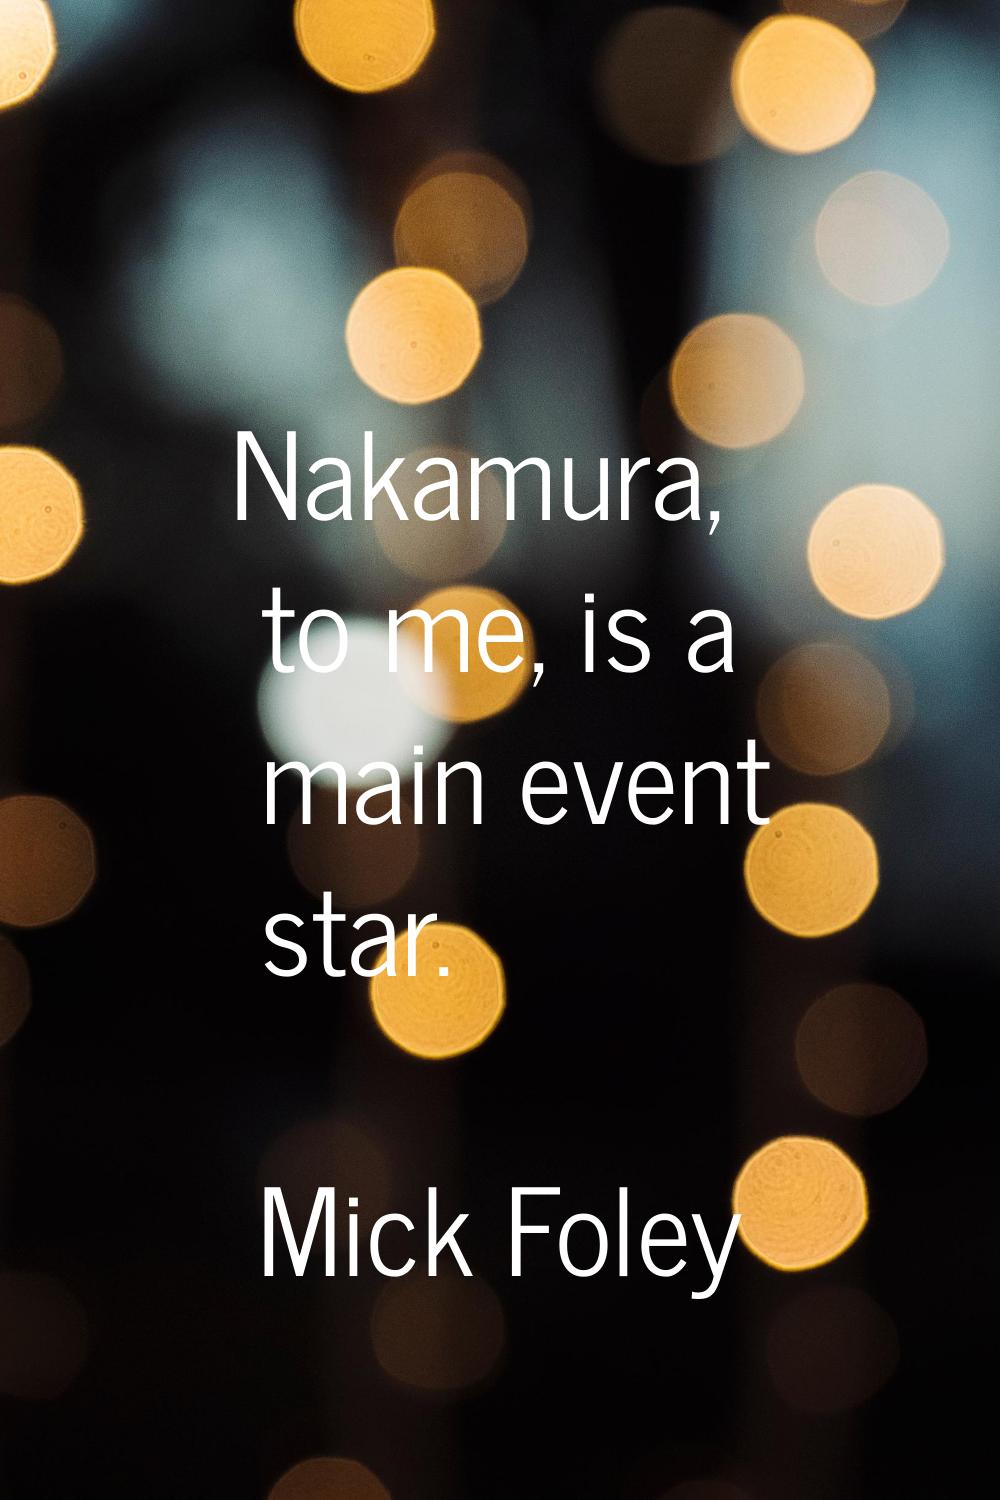 Nakamura, to me, is a main event star.